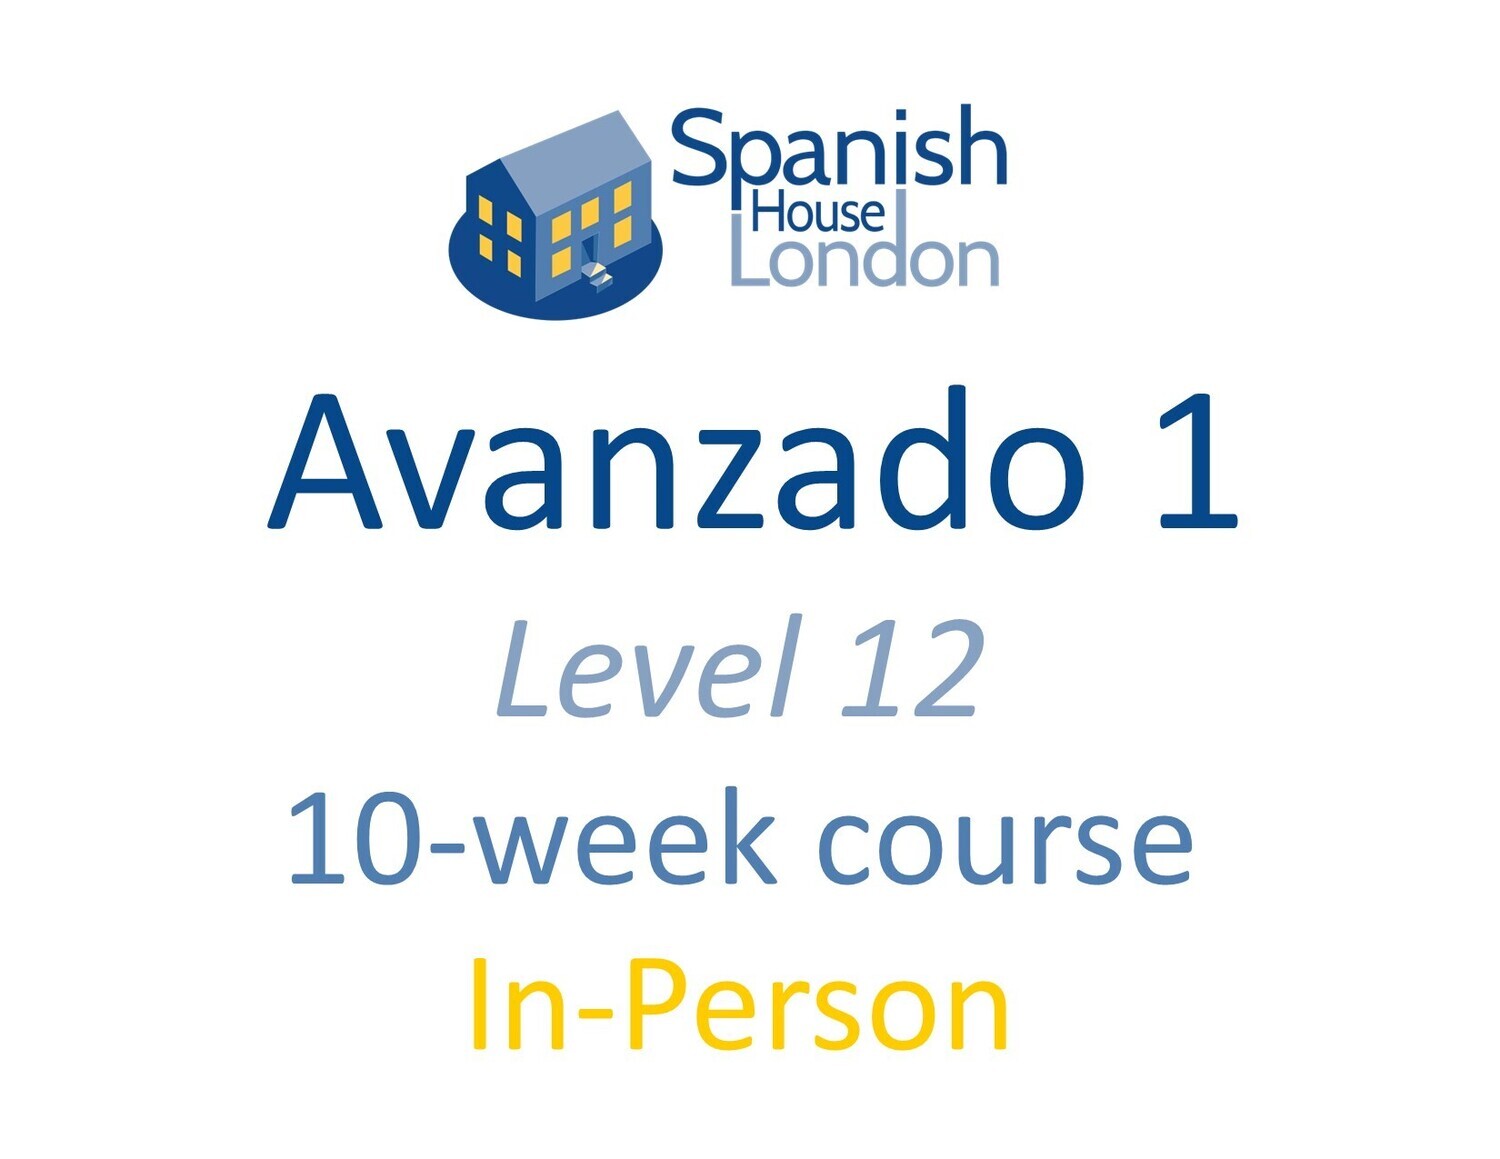 Avanzado 1 Course starting on 26th June at 6pm in Euston / King's Cross